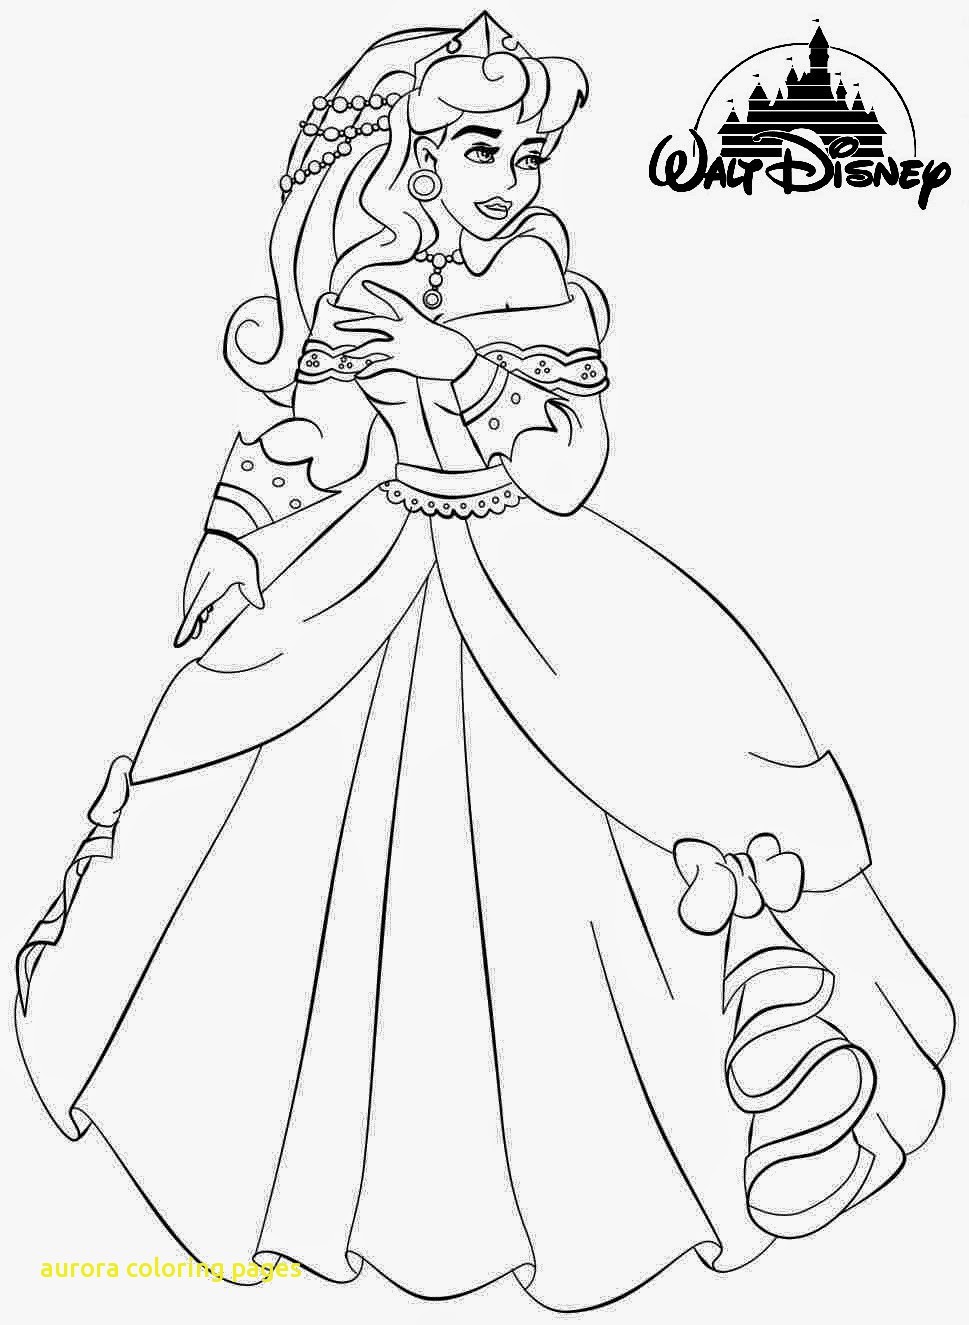 Exciting Princess Aurora Coloring Pages Colouring In Funny With 18 Disney Print